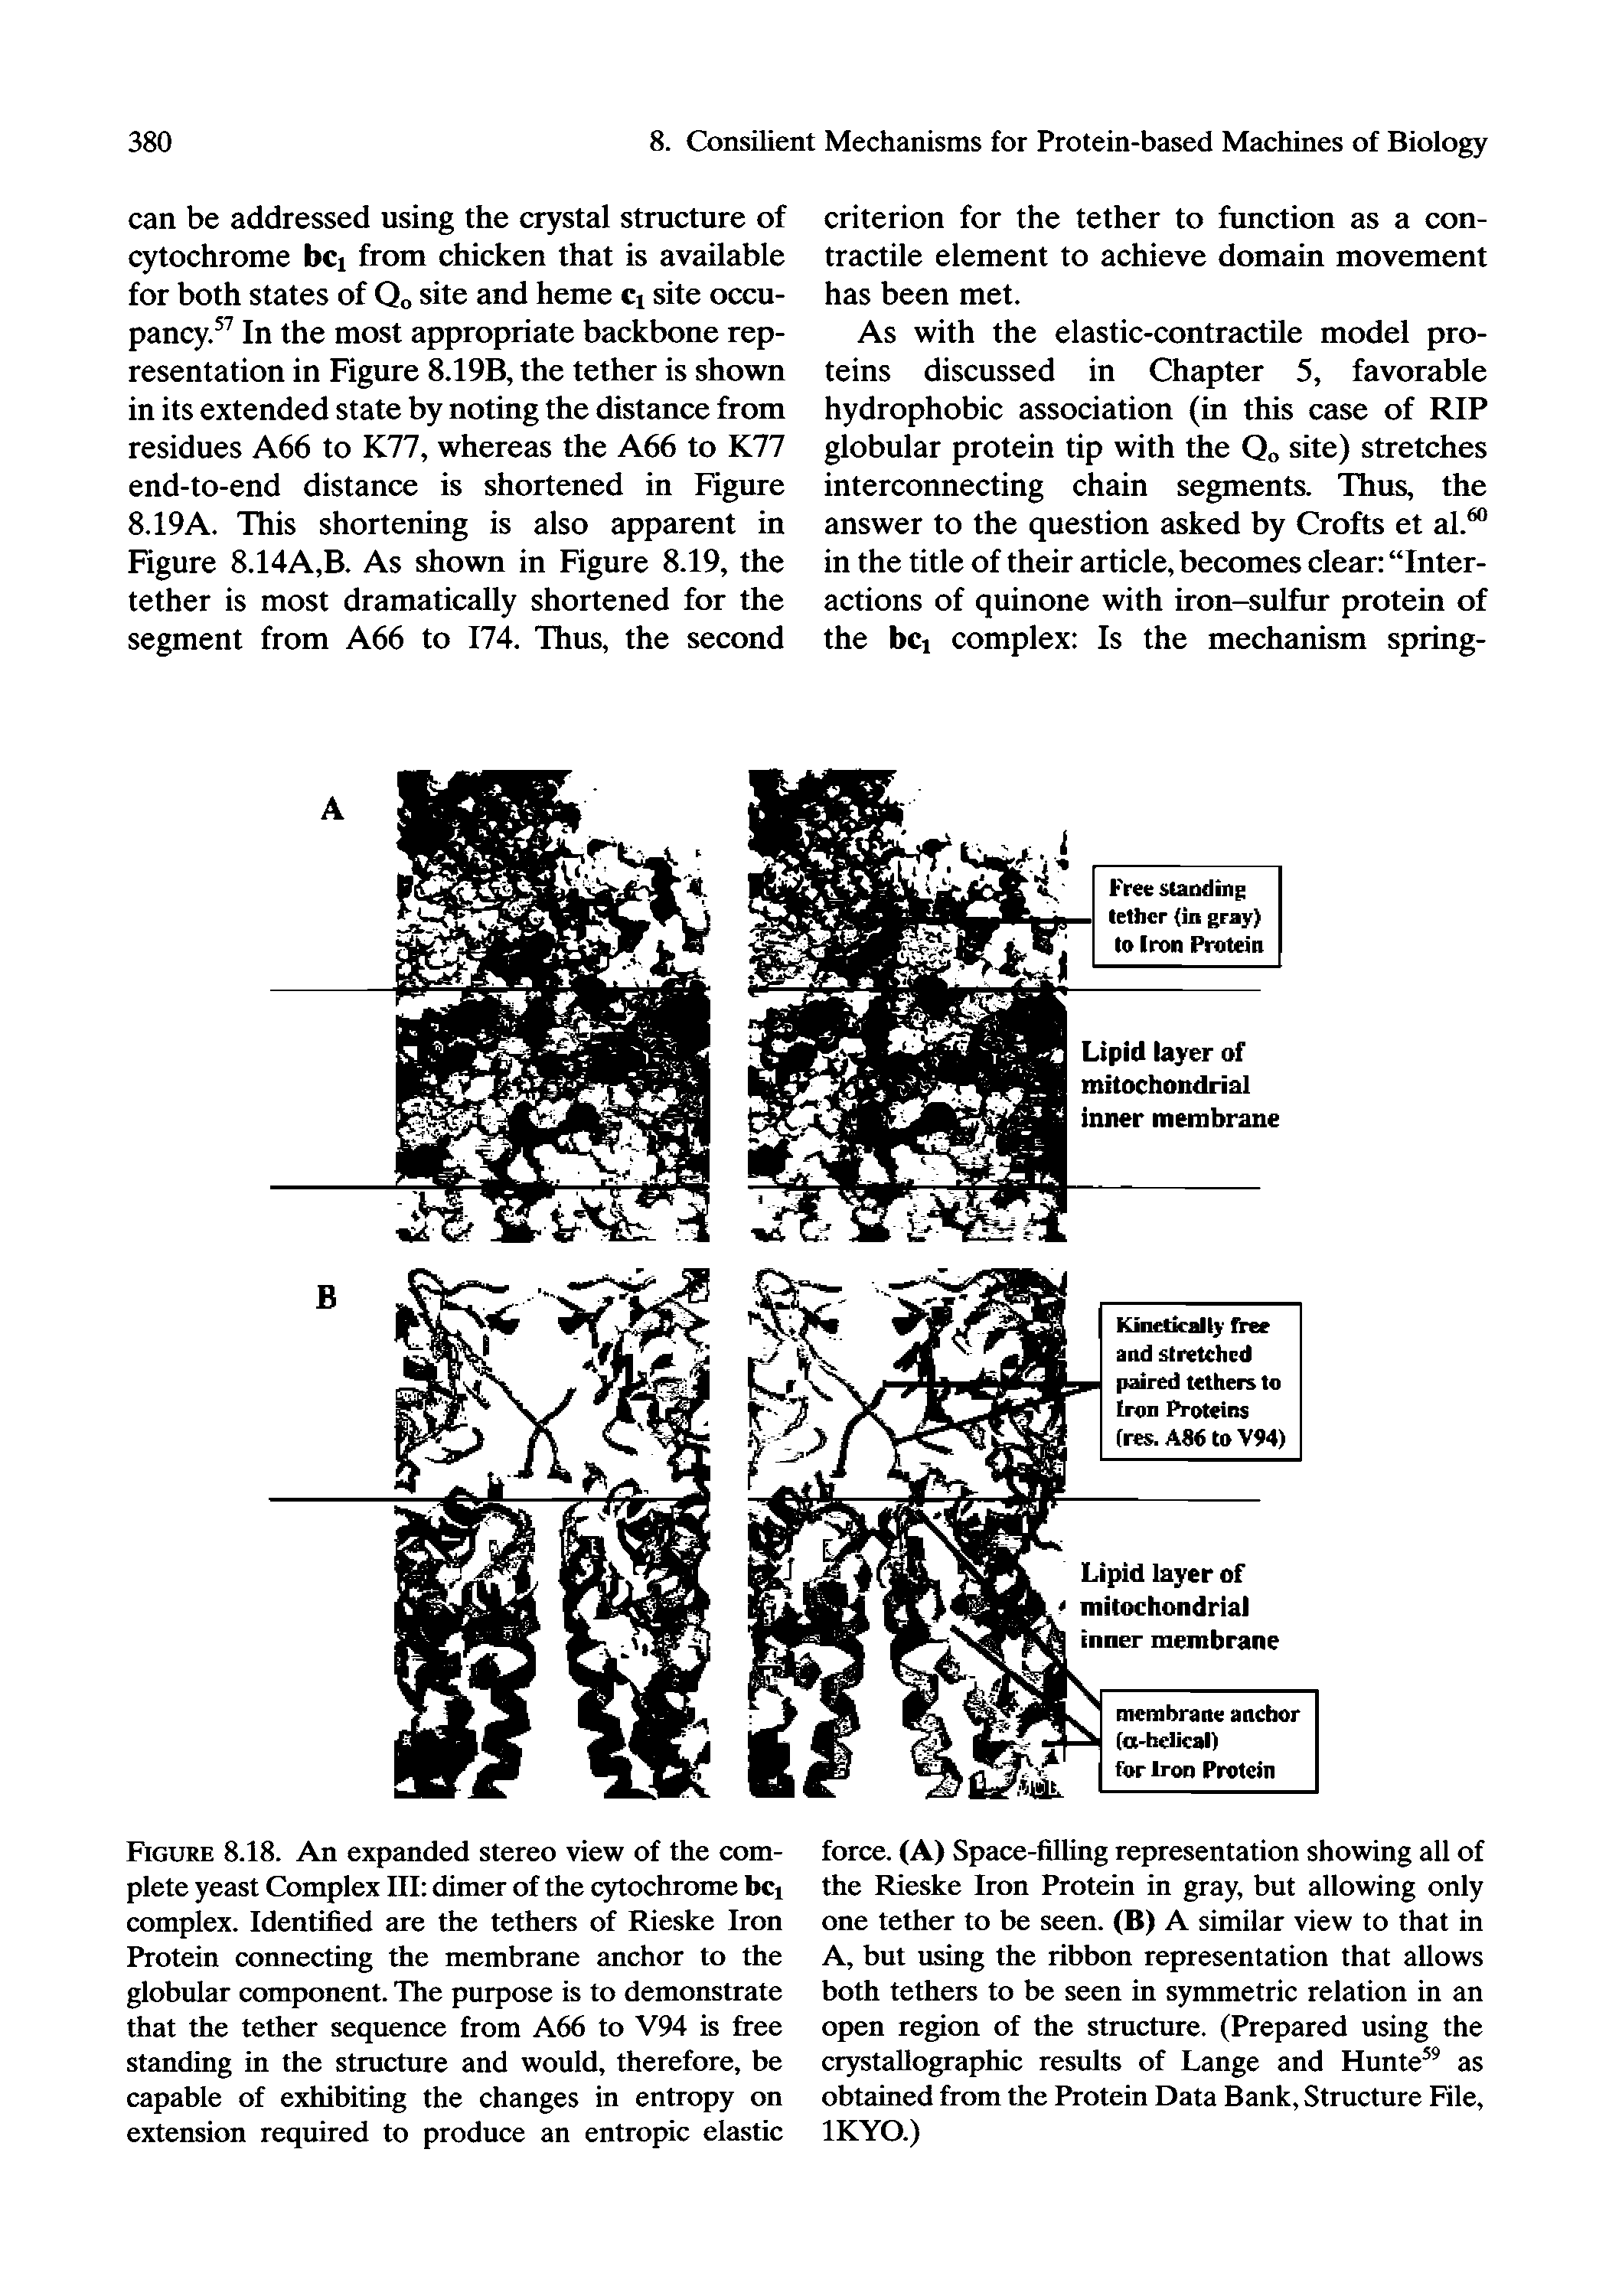 Figure 8.18. An expanded stereo view of the complete yeast Complex HI dimer of the qrtochrome bci complex. Identified are the tethers of Rieske Iron Protein connecting the membrane anchor to the globular component. The purpose is to demonstrate that the tether sequence from A66 to V94 is free standing in the structure and would, therefore, be capable of exhibiting the changes in entropy on extension required to produce an entropic elastic...